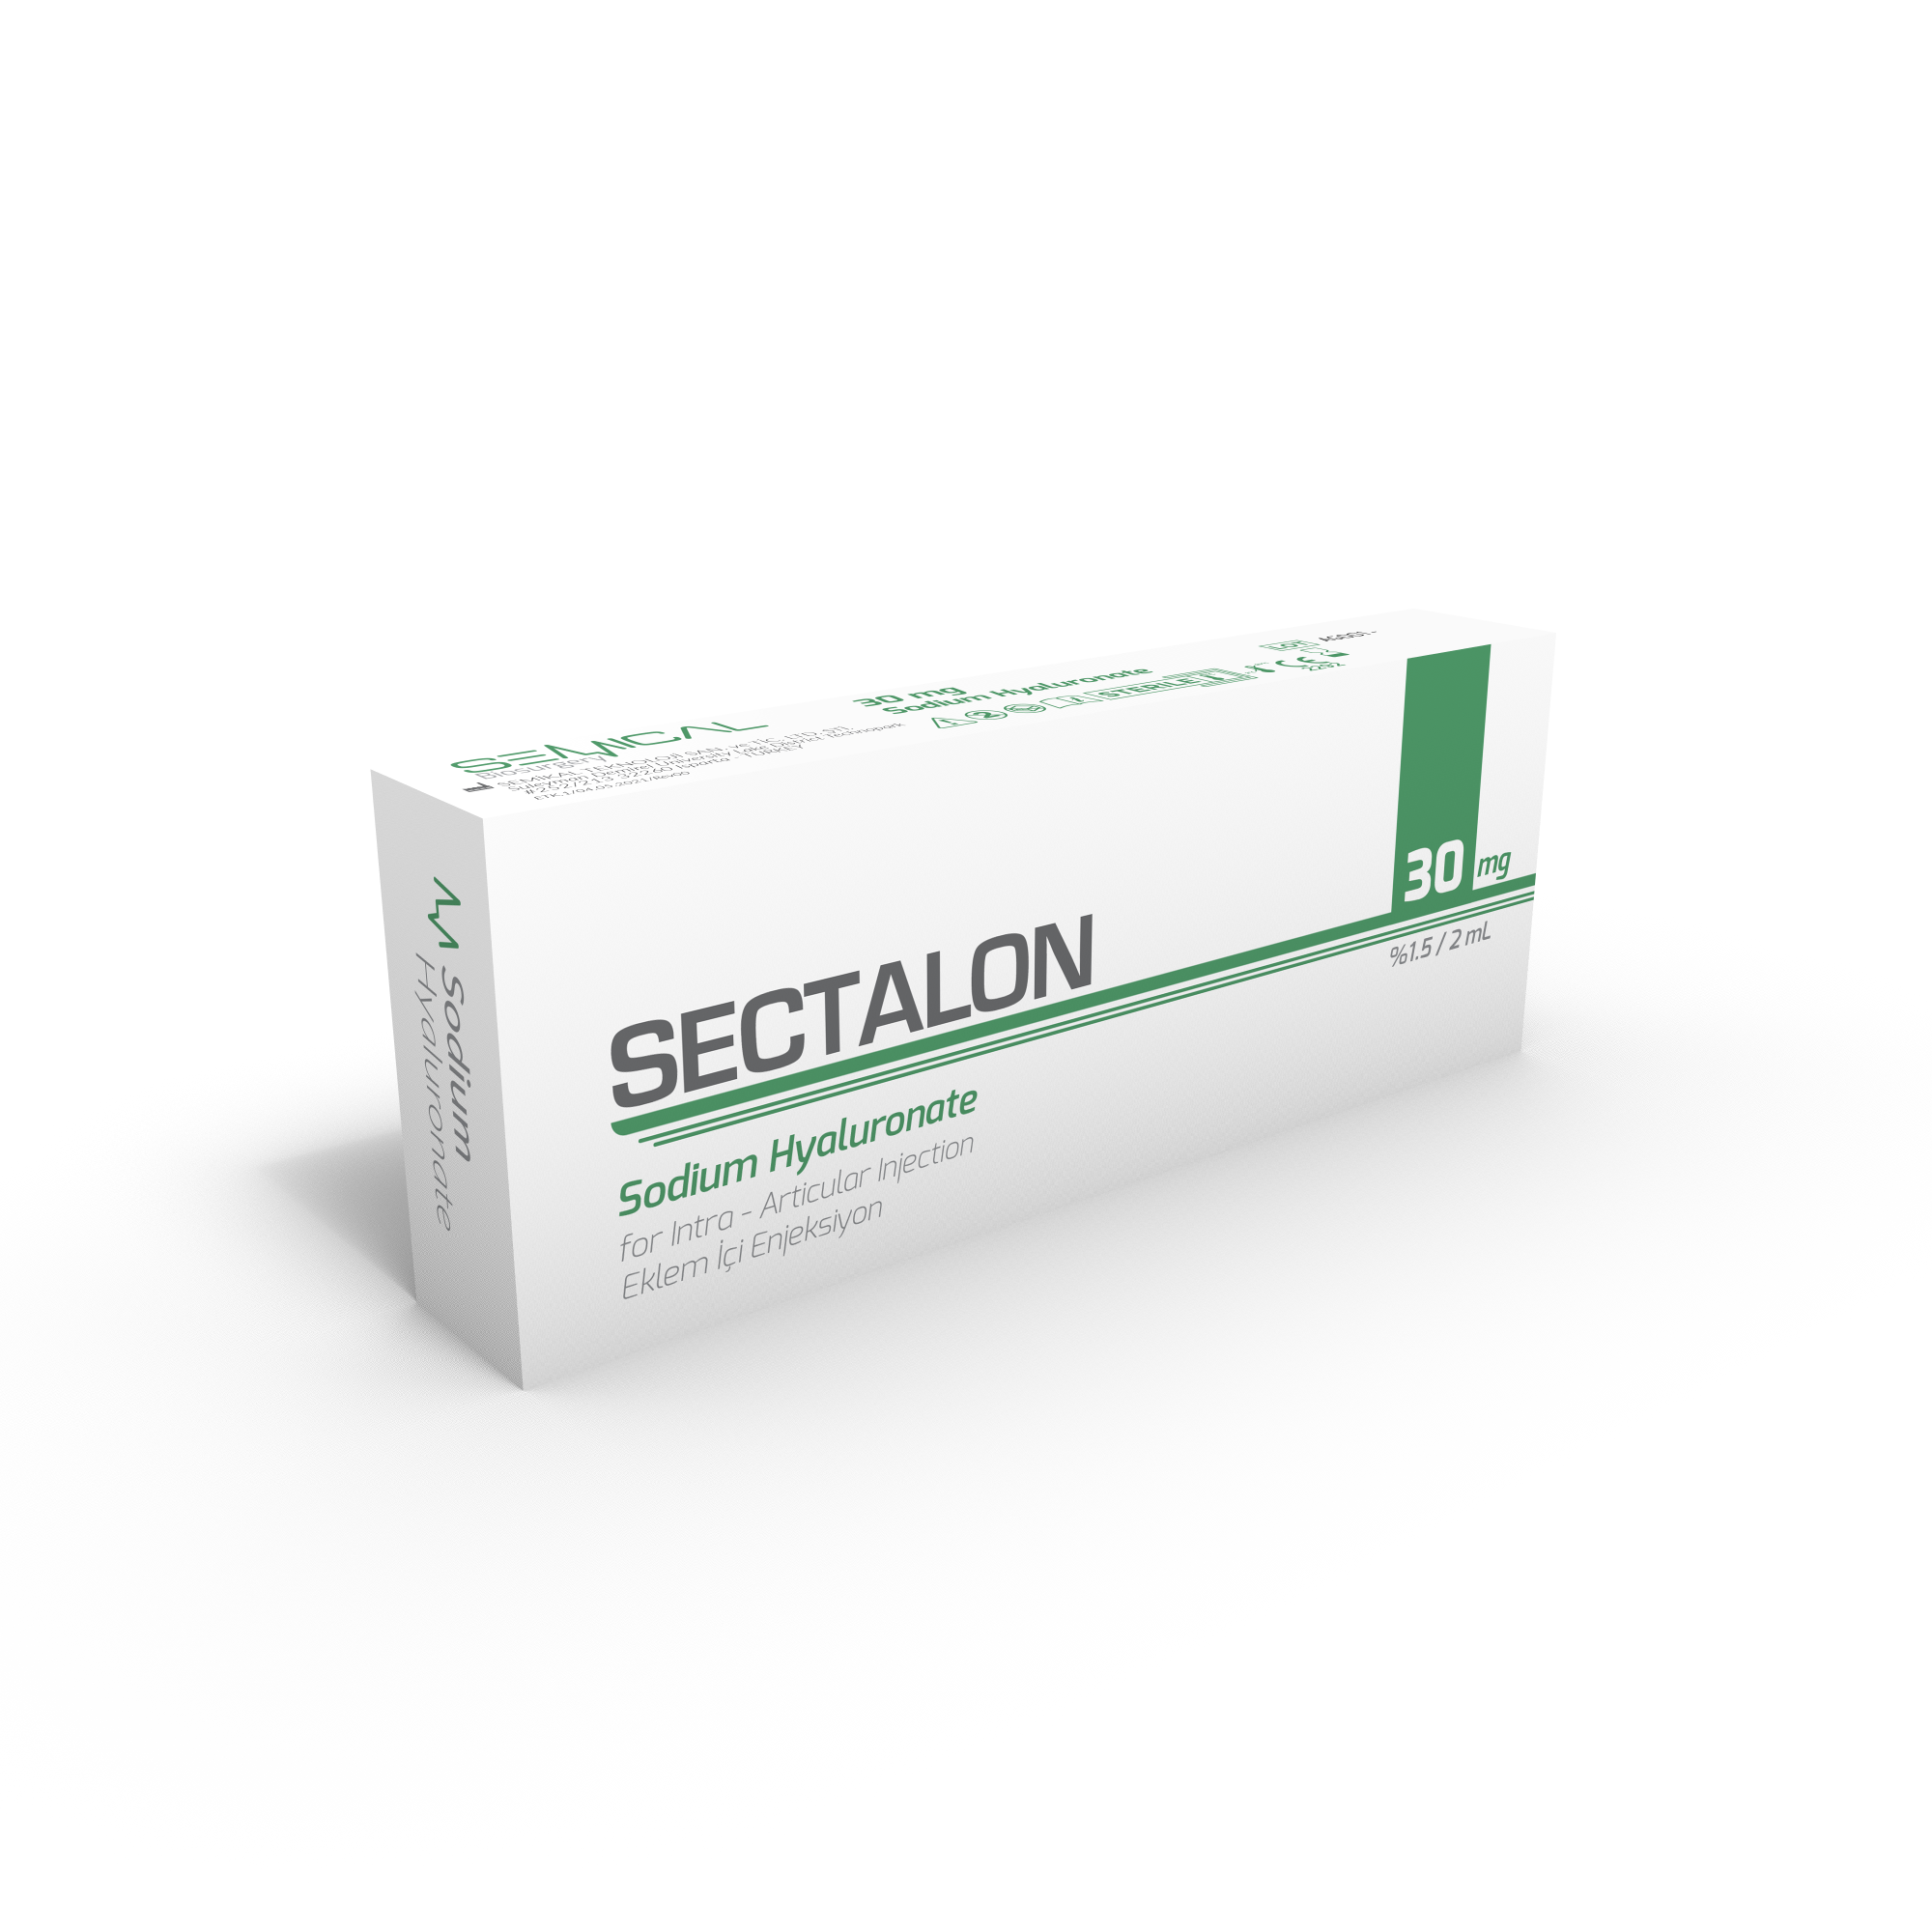 Intra Articular Gel | VISCOSUPPLEMENT | Modified Hyaluronic Acid | 2-5 mL | 10-120 mg